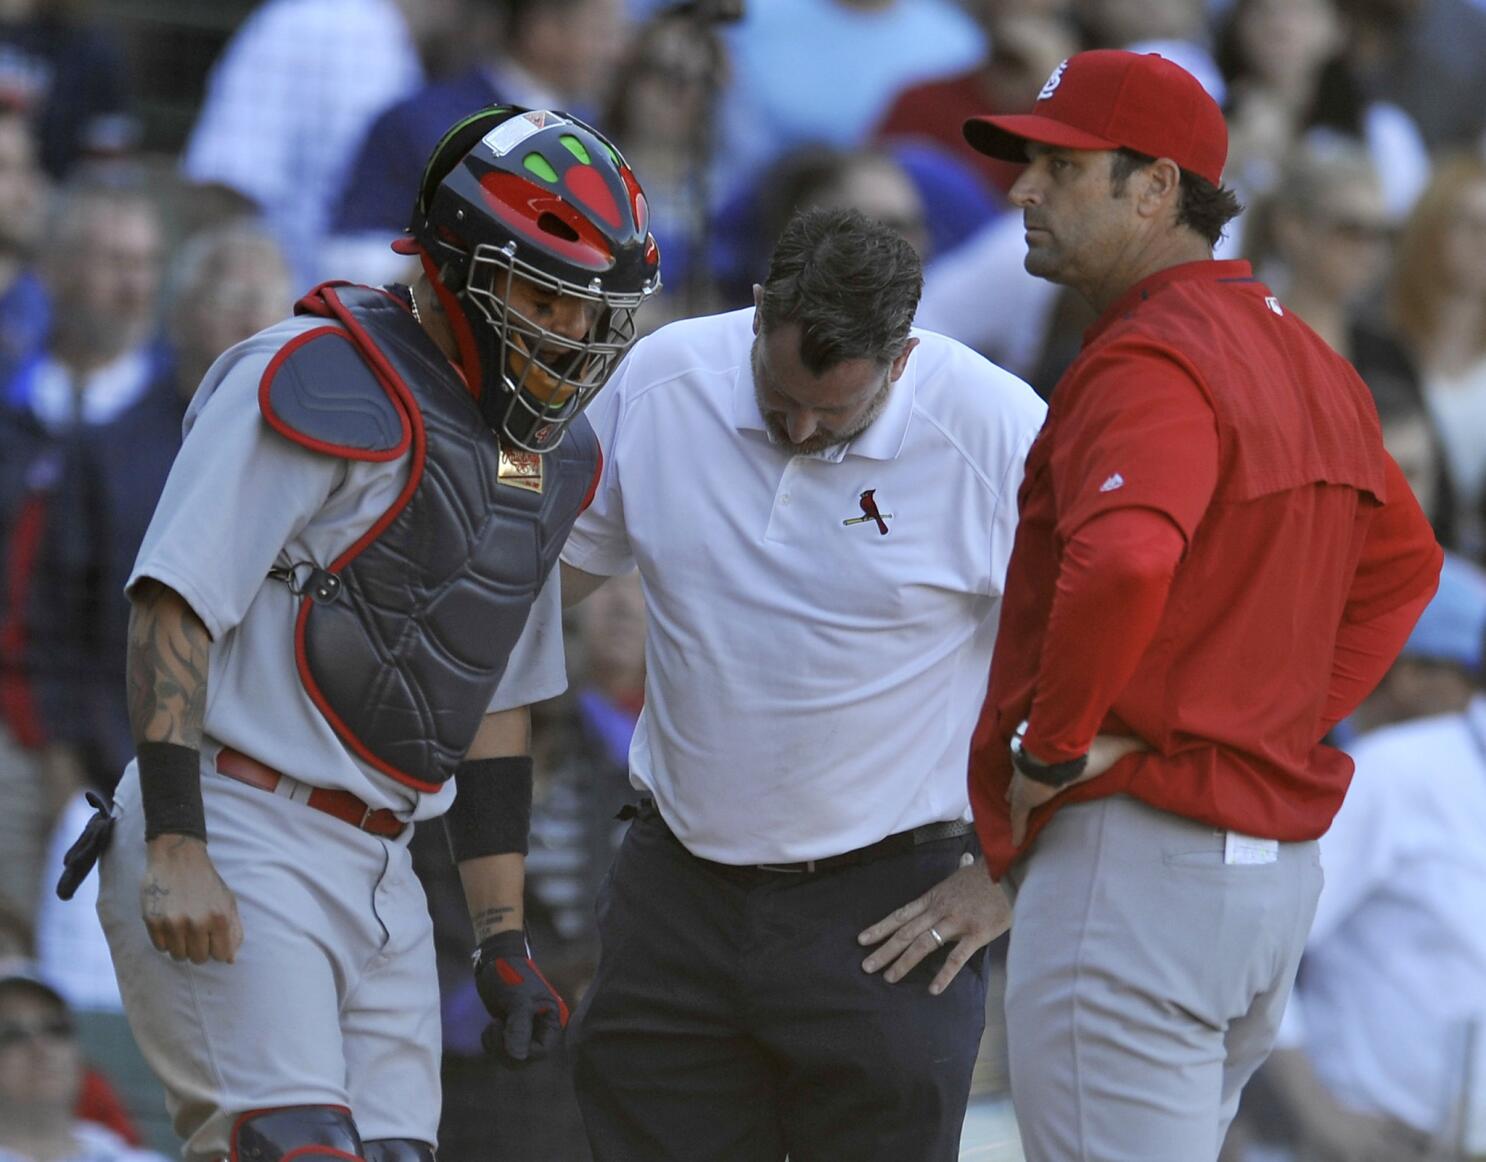 All-Star catcher Yadier Molina returning to Cardinals for 'final